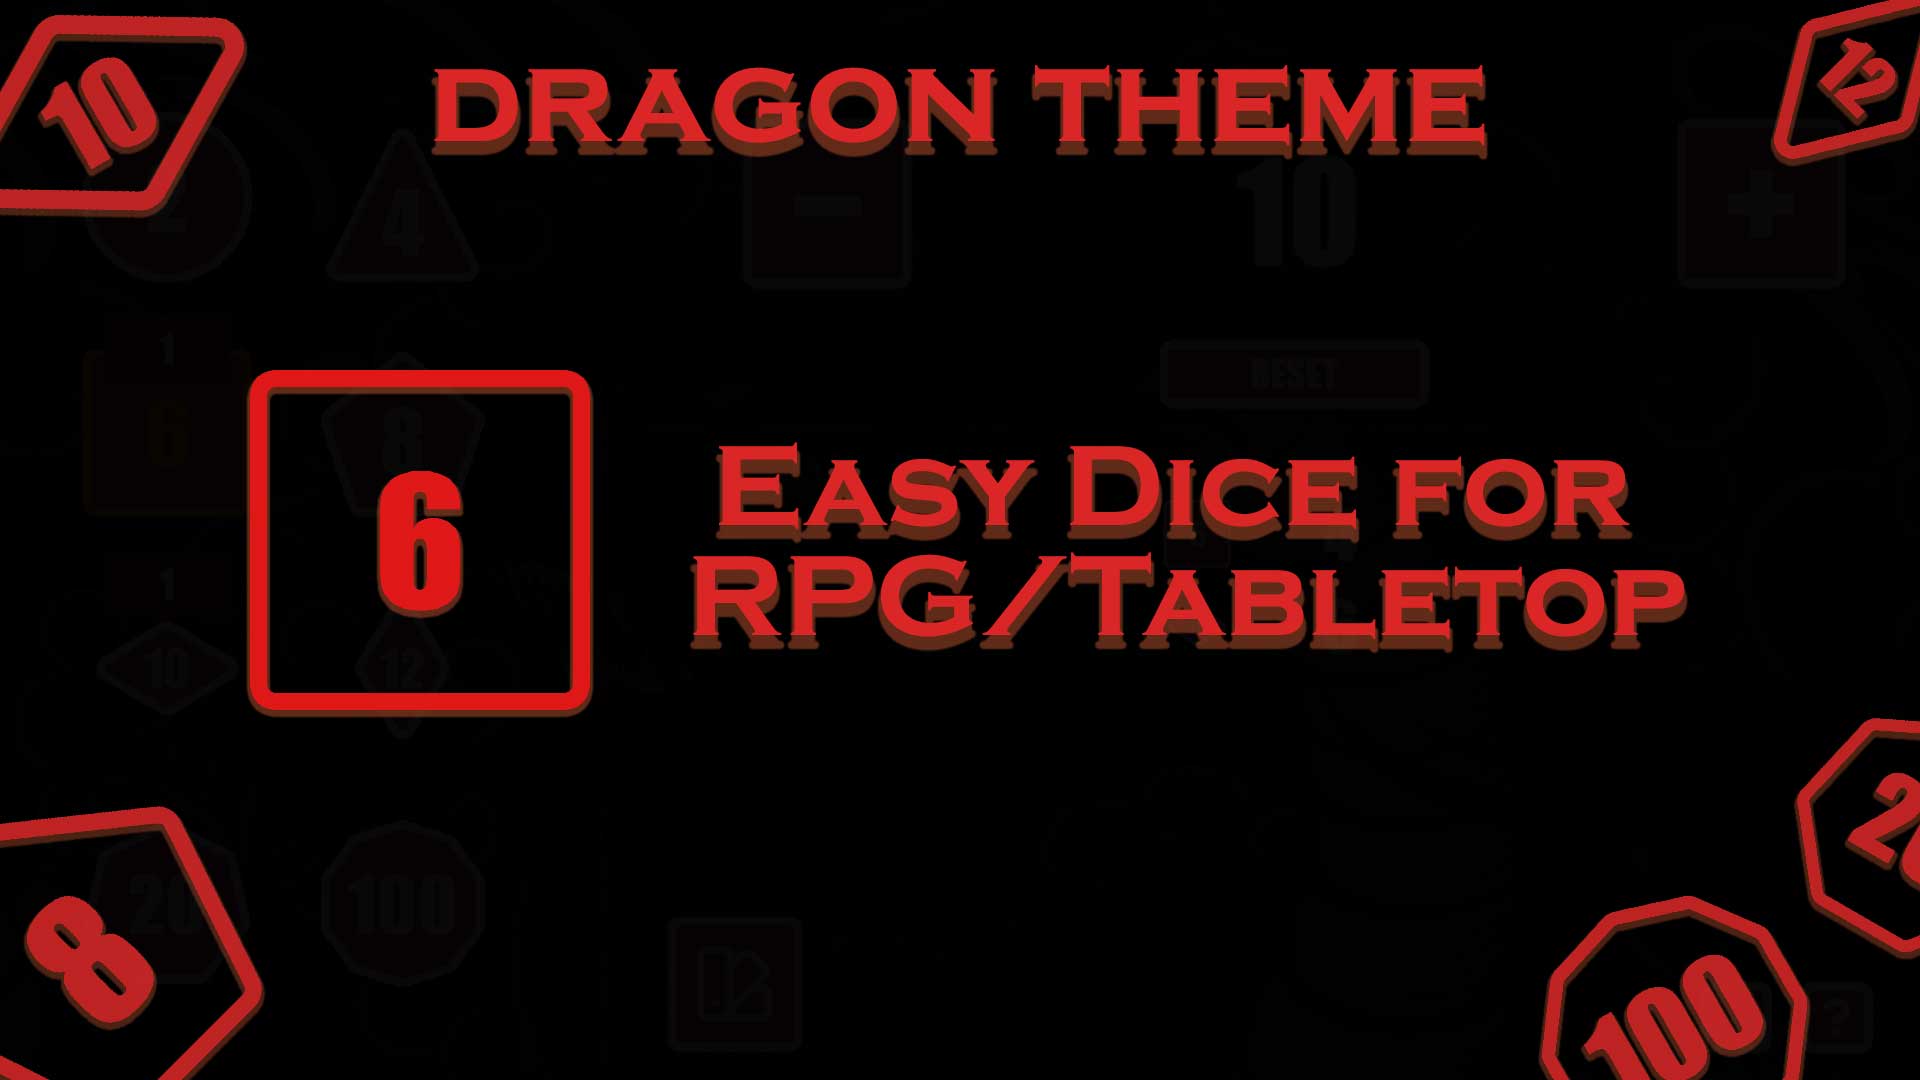 Easy Dice for RPG/Tabletop - Dragon Theme